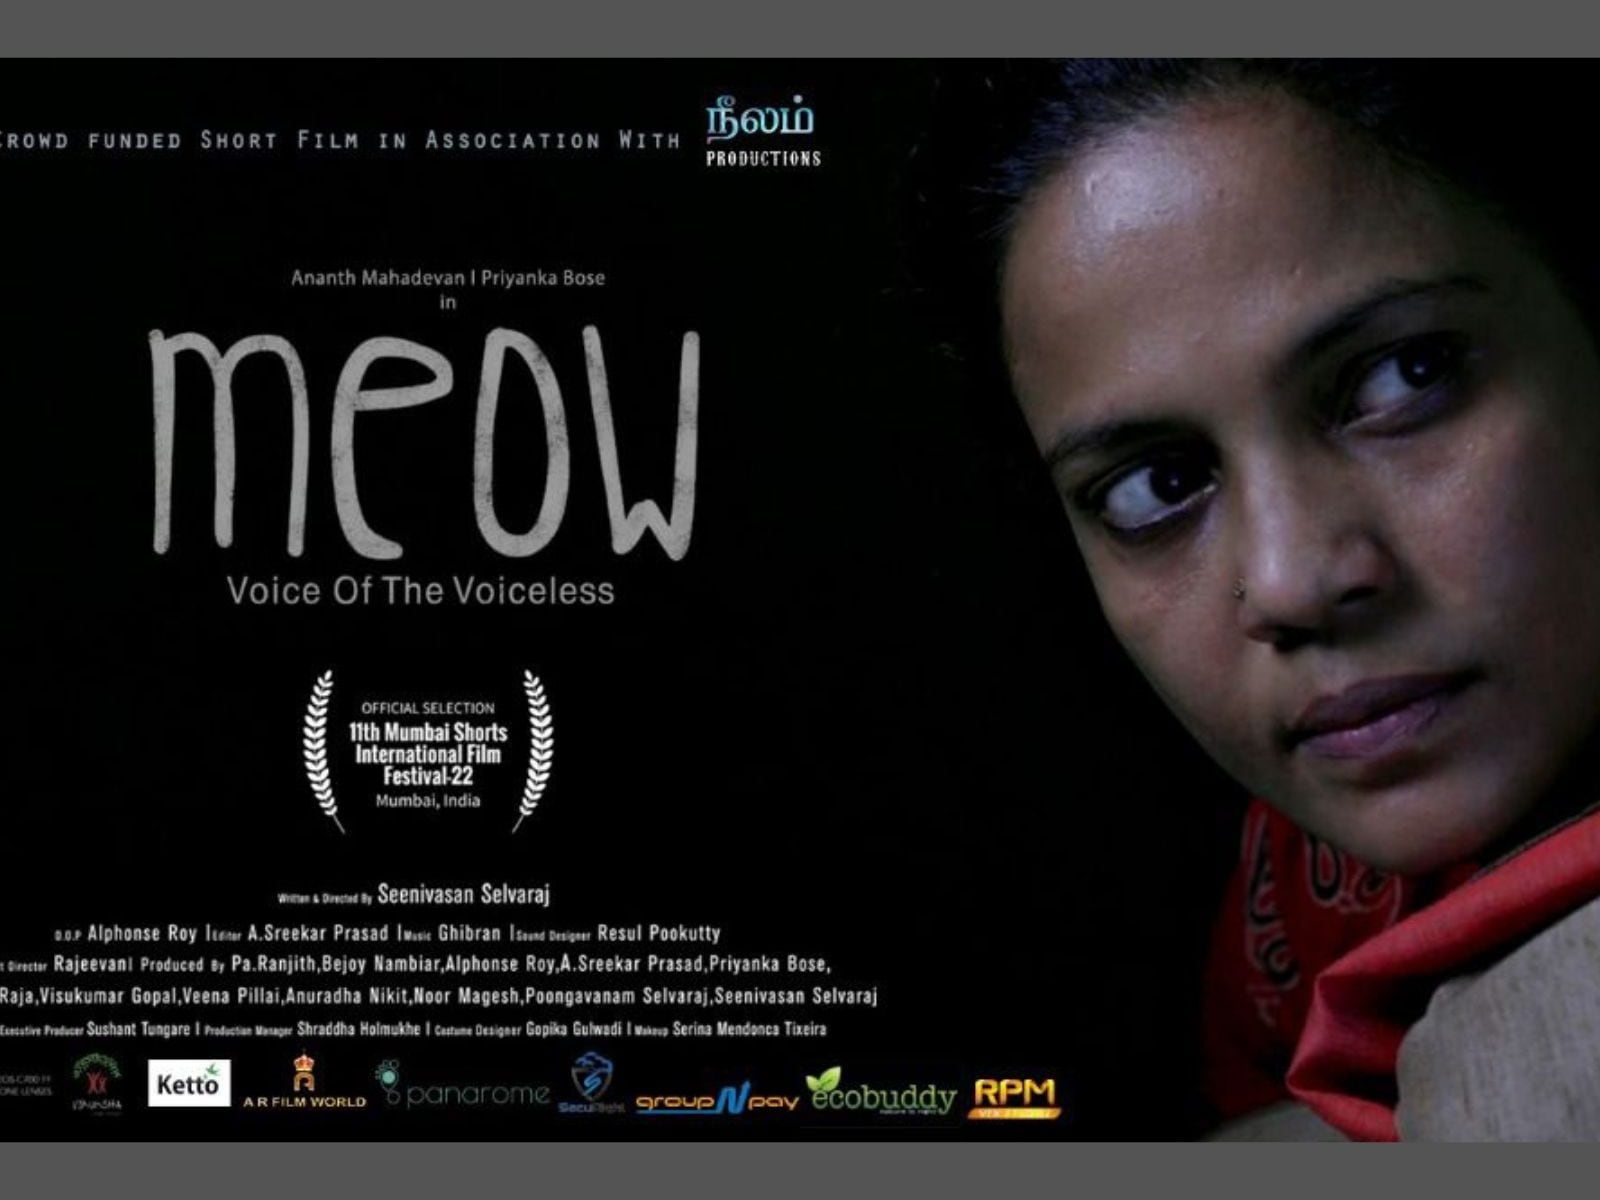 Sensitive Take on Child Sexual Abuse by Short Film 'Meow', Educates Kids  About 'Good, Bad Touch' - News18